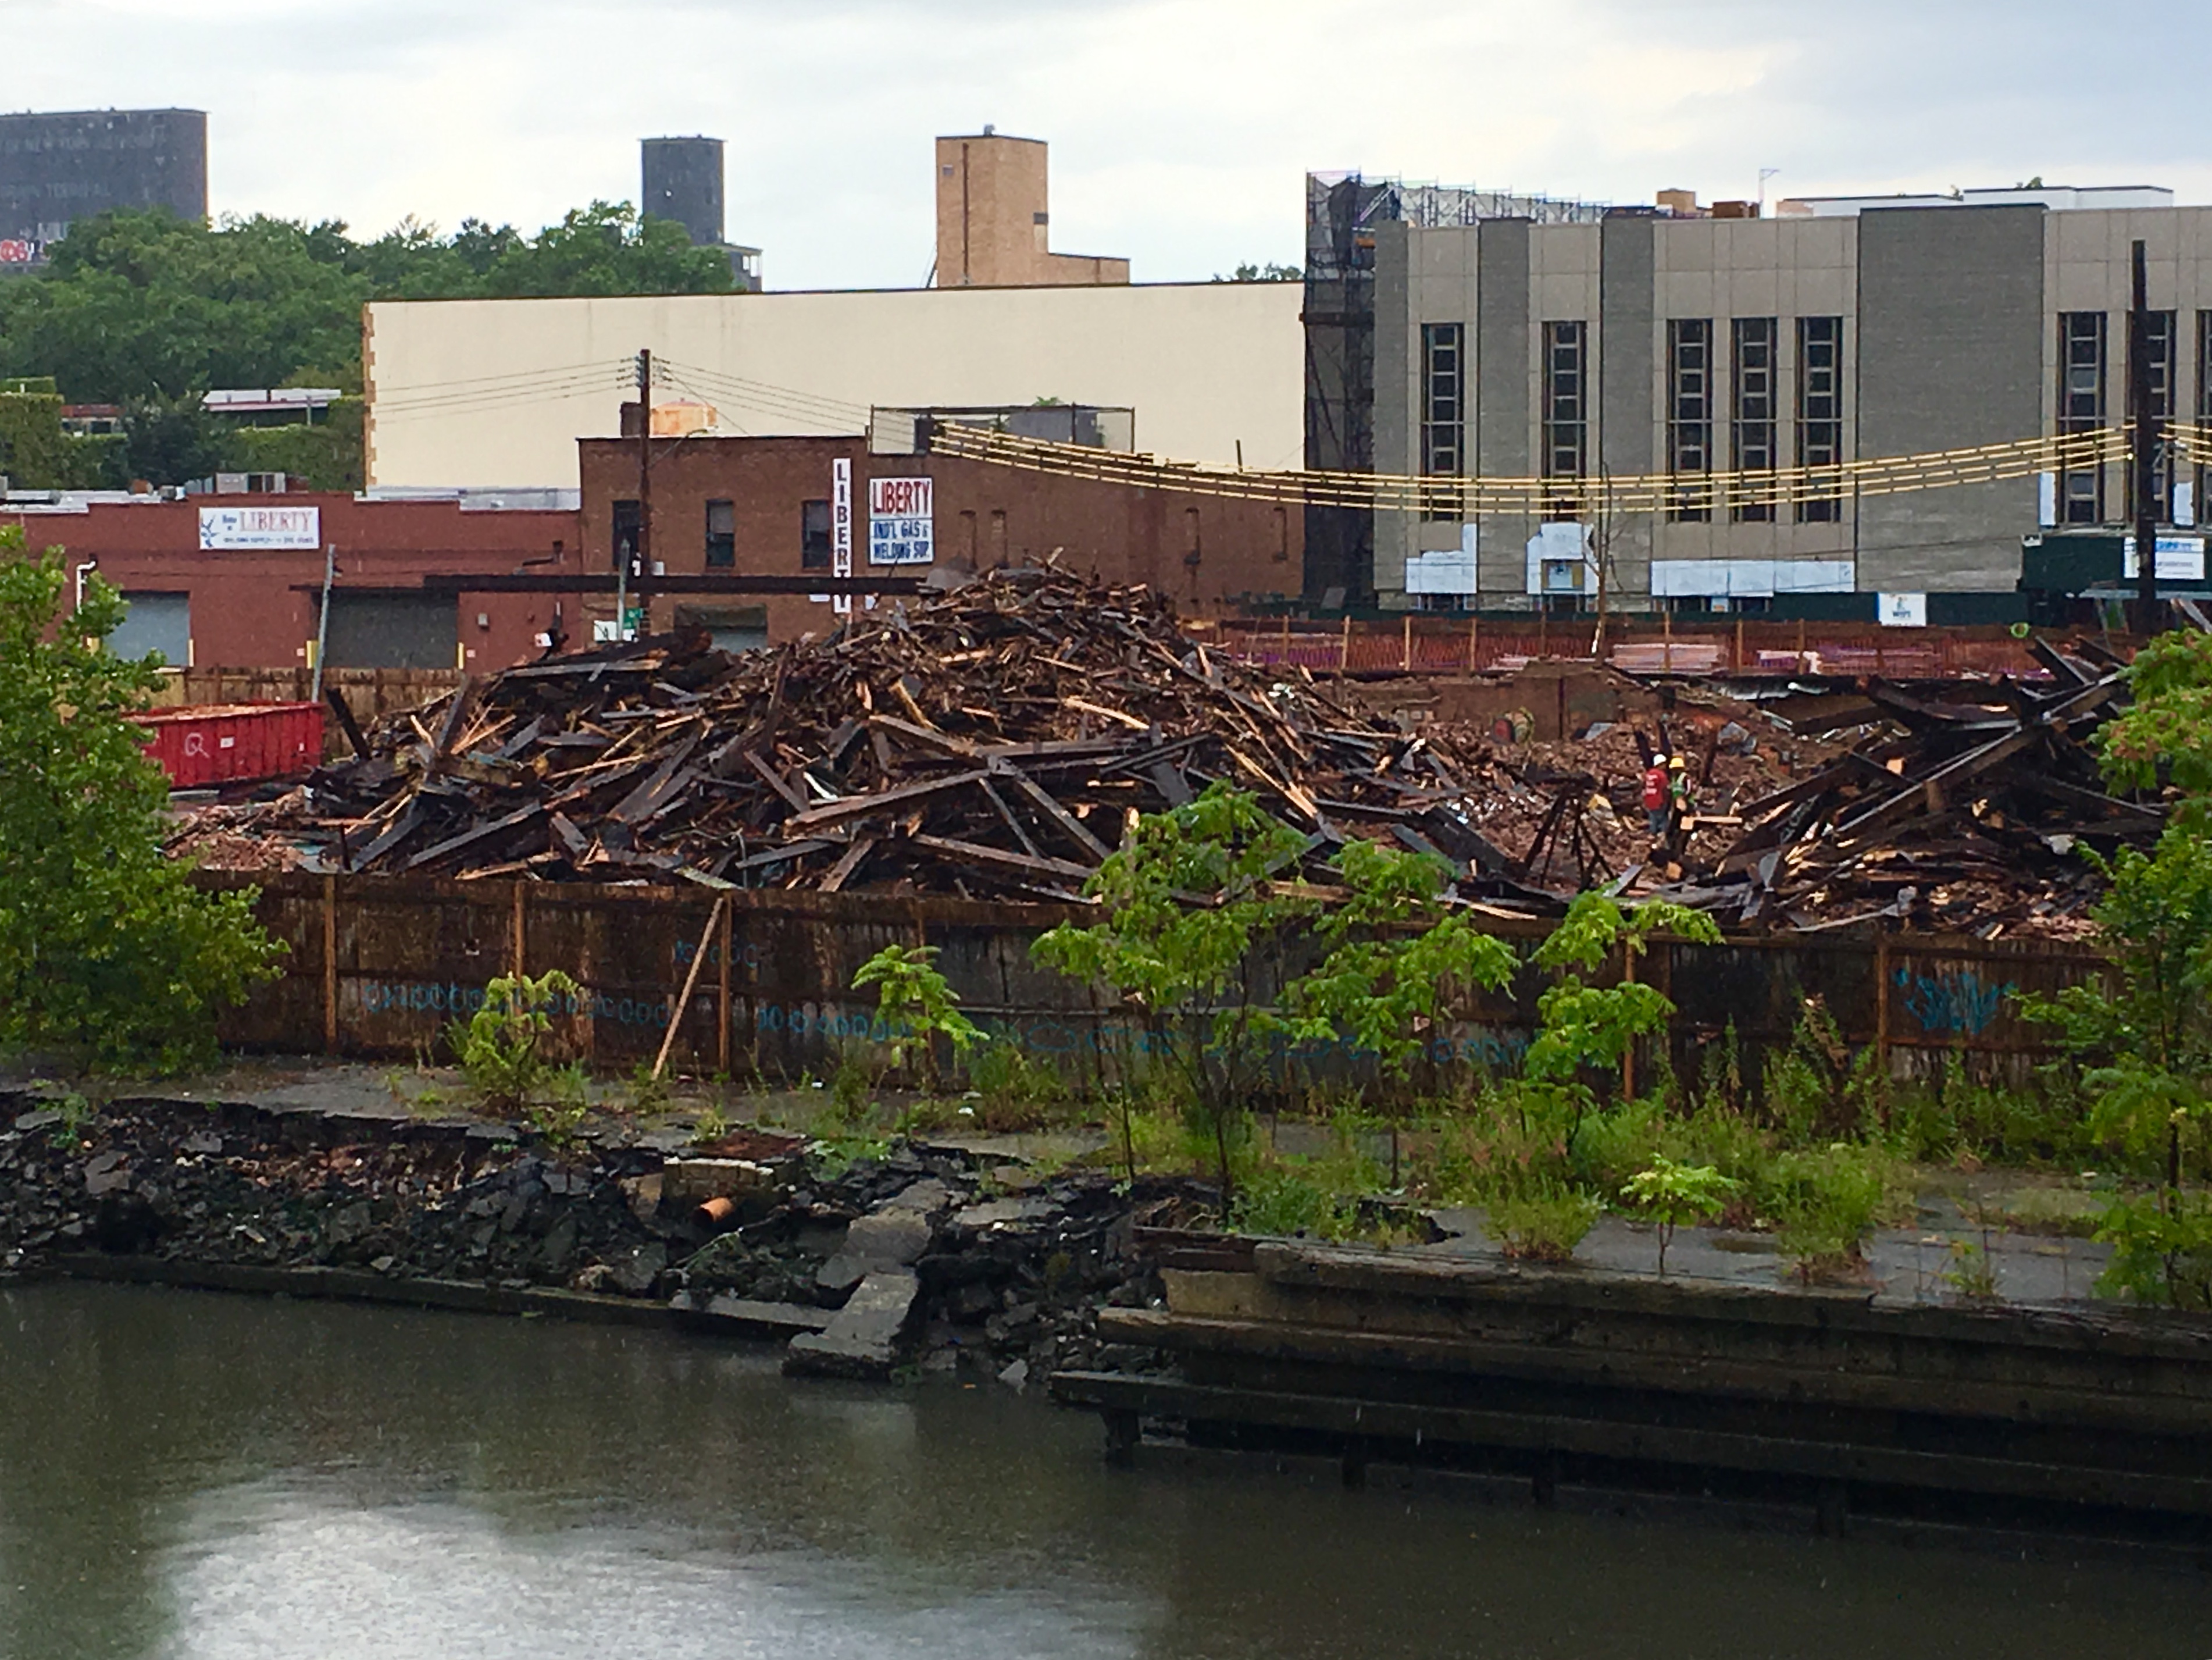 Rain-soaked timbers are piled up on the S.W. Bowne Grain Storehouse site. Eagle photo by Lore Croghan